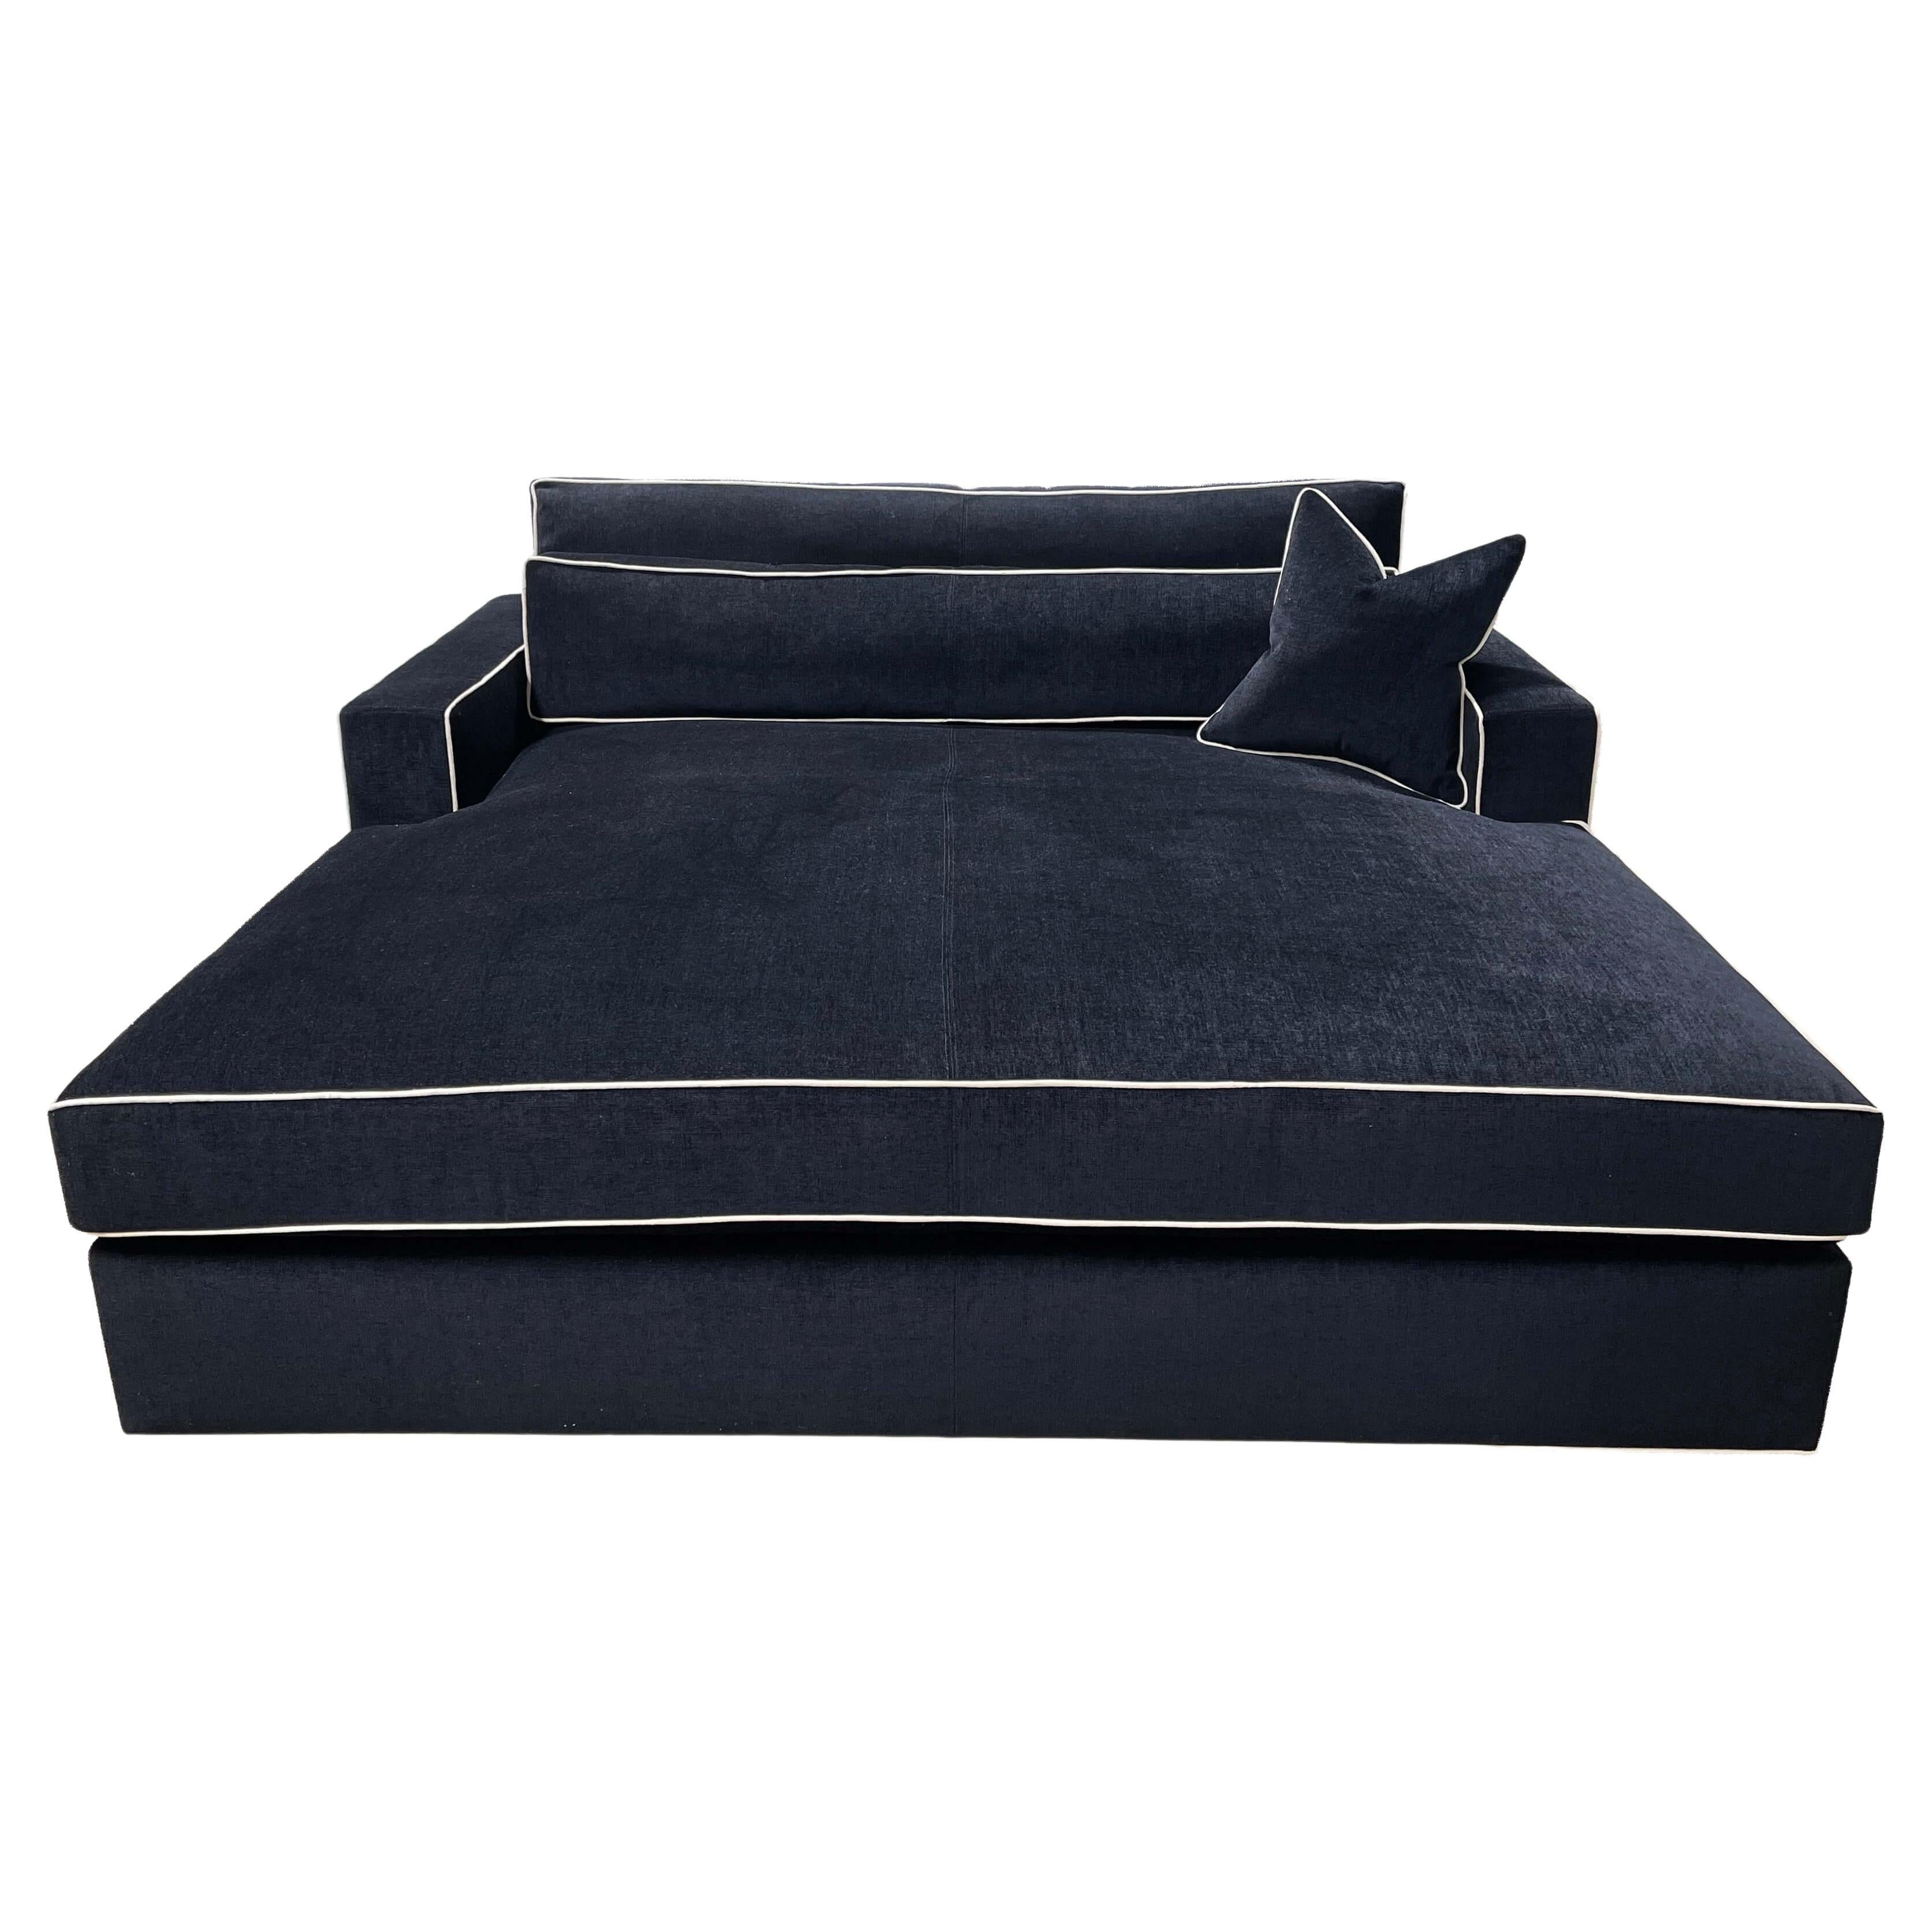 Modell One Daybed im Angebot